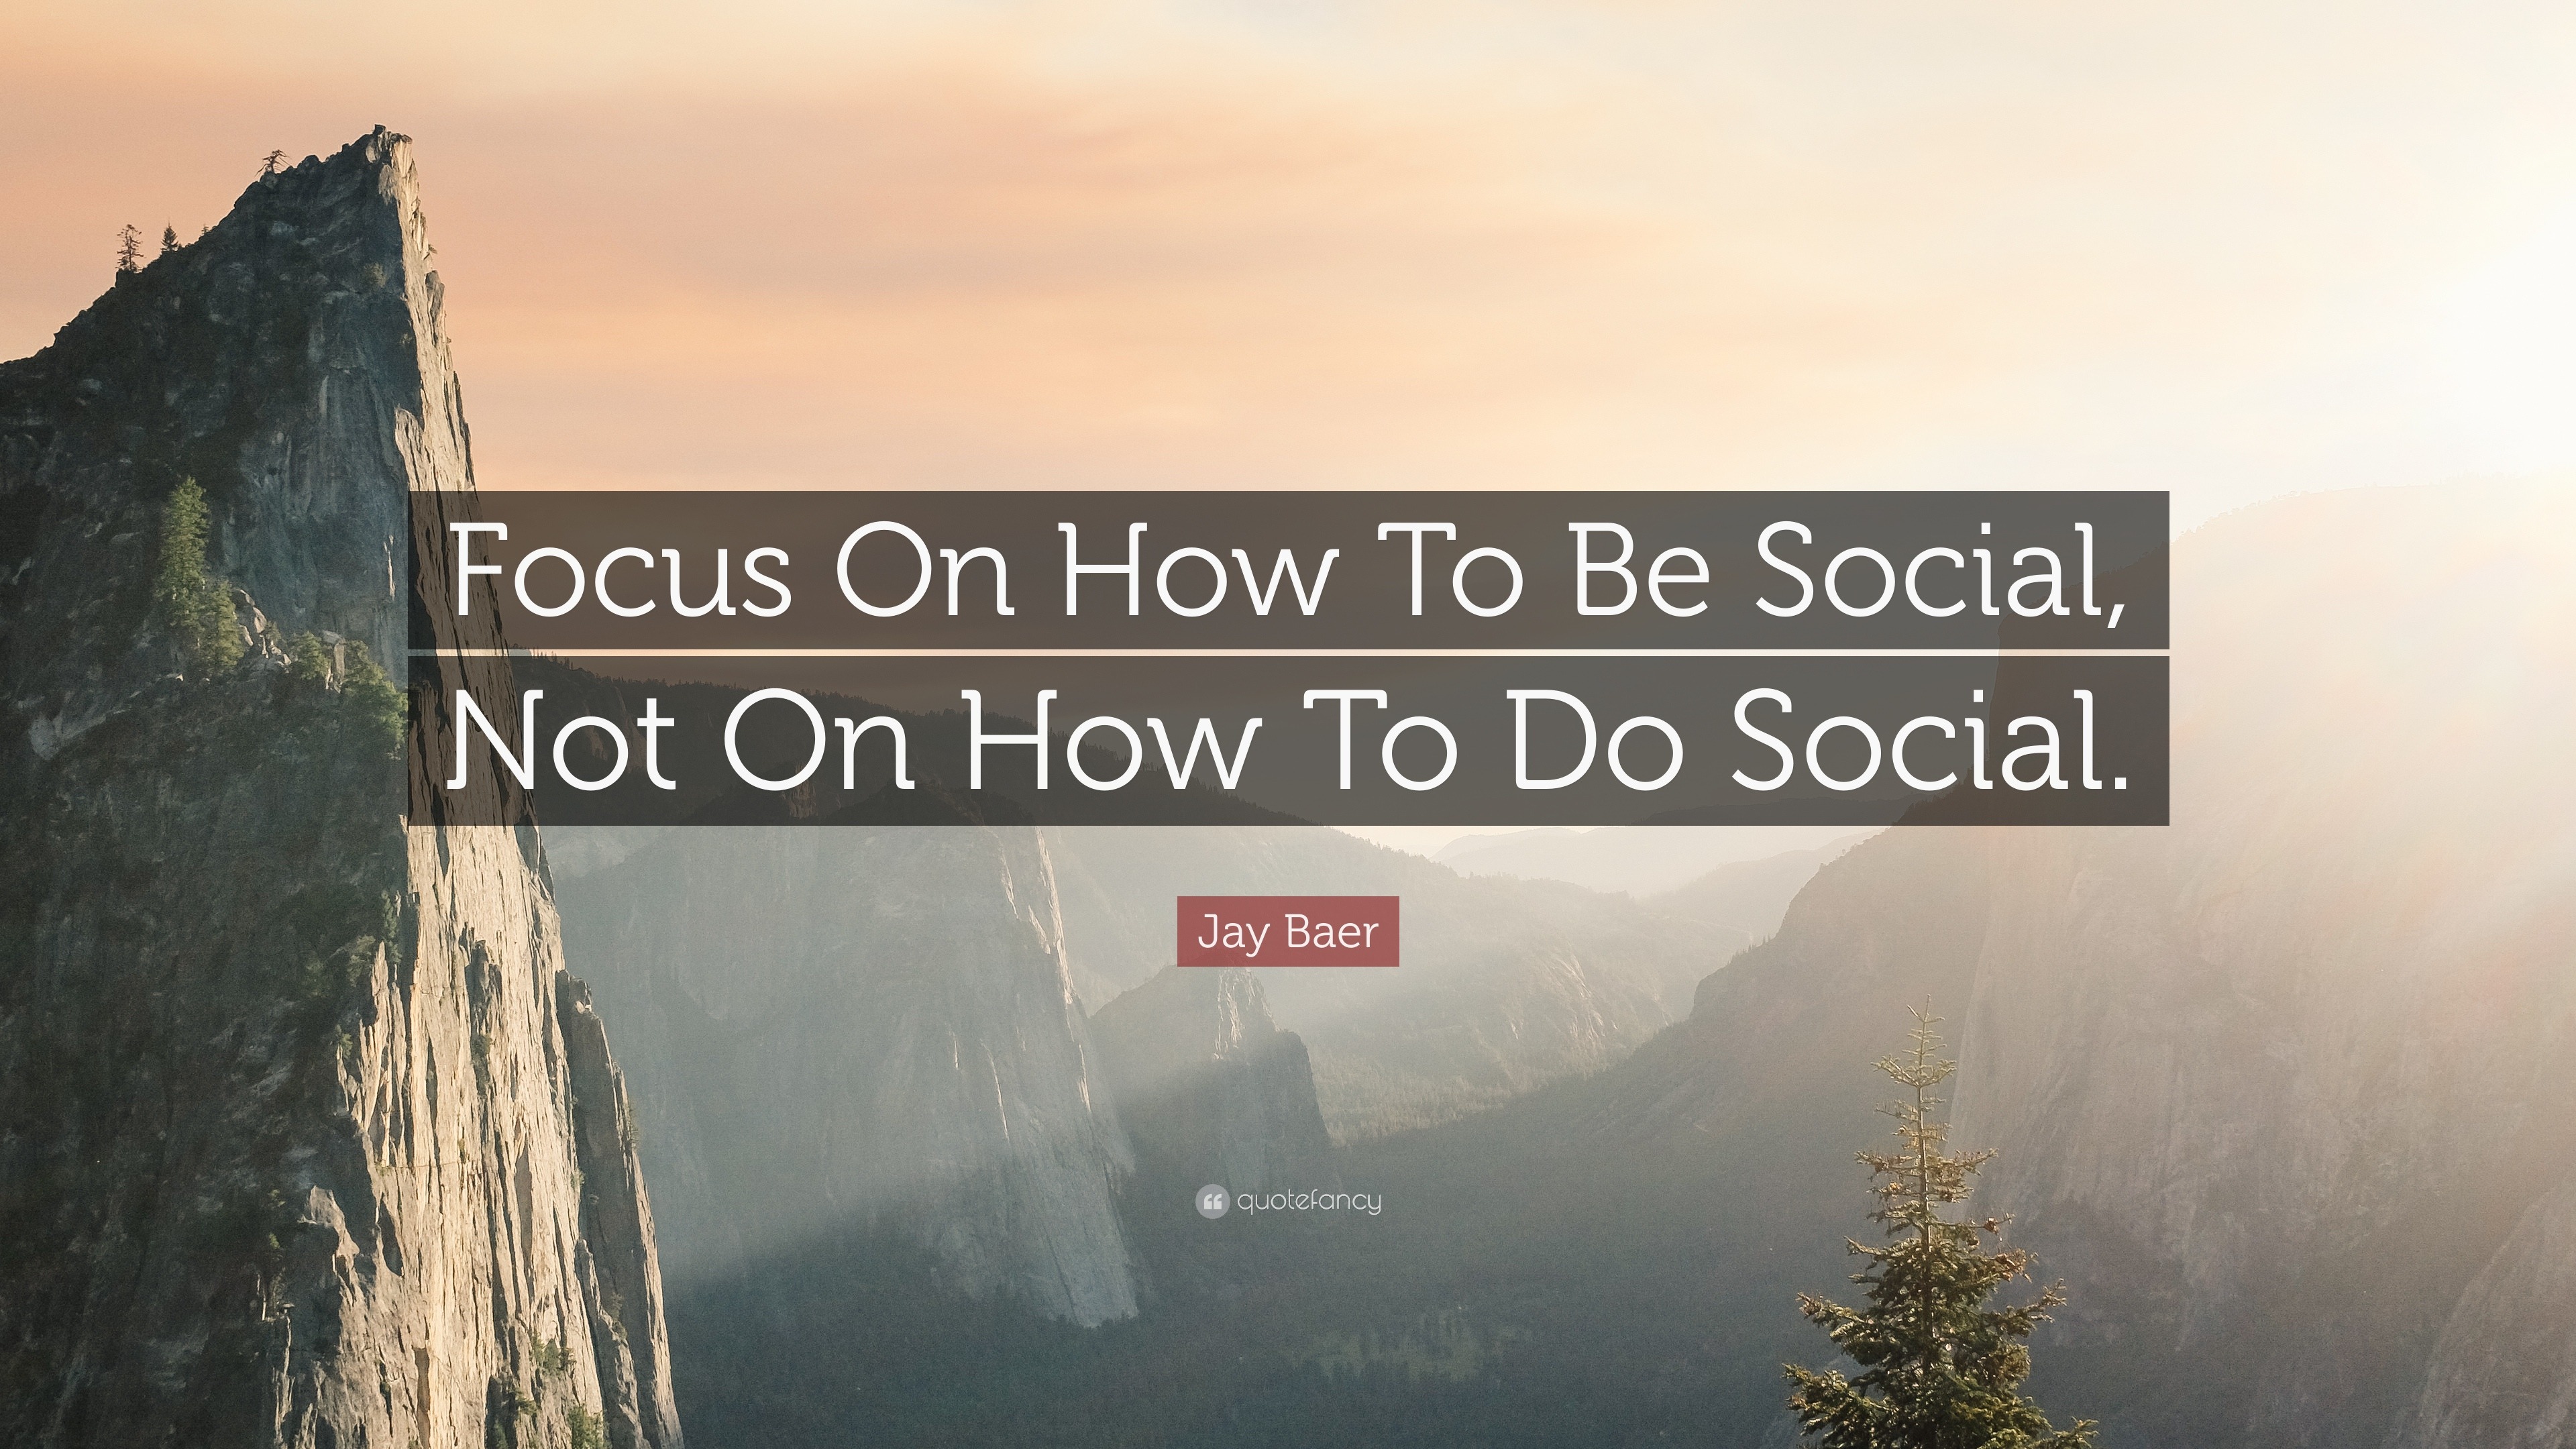 Jay Baer Quote: “Focus On How To Be Social, Not On How To Do Social.”